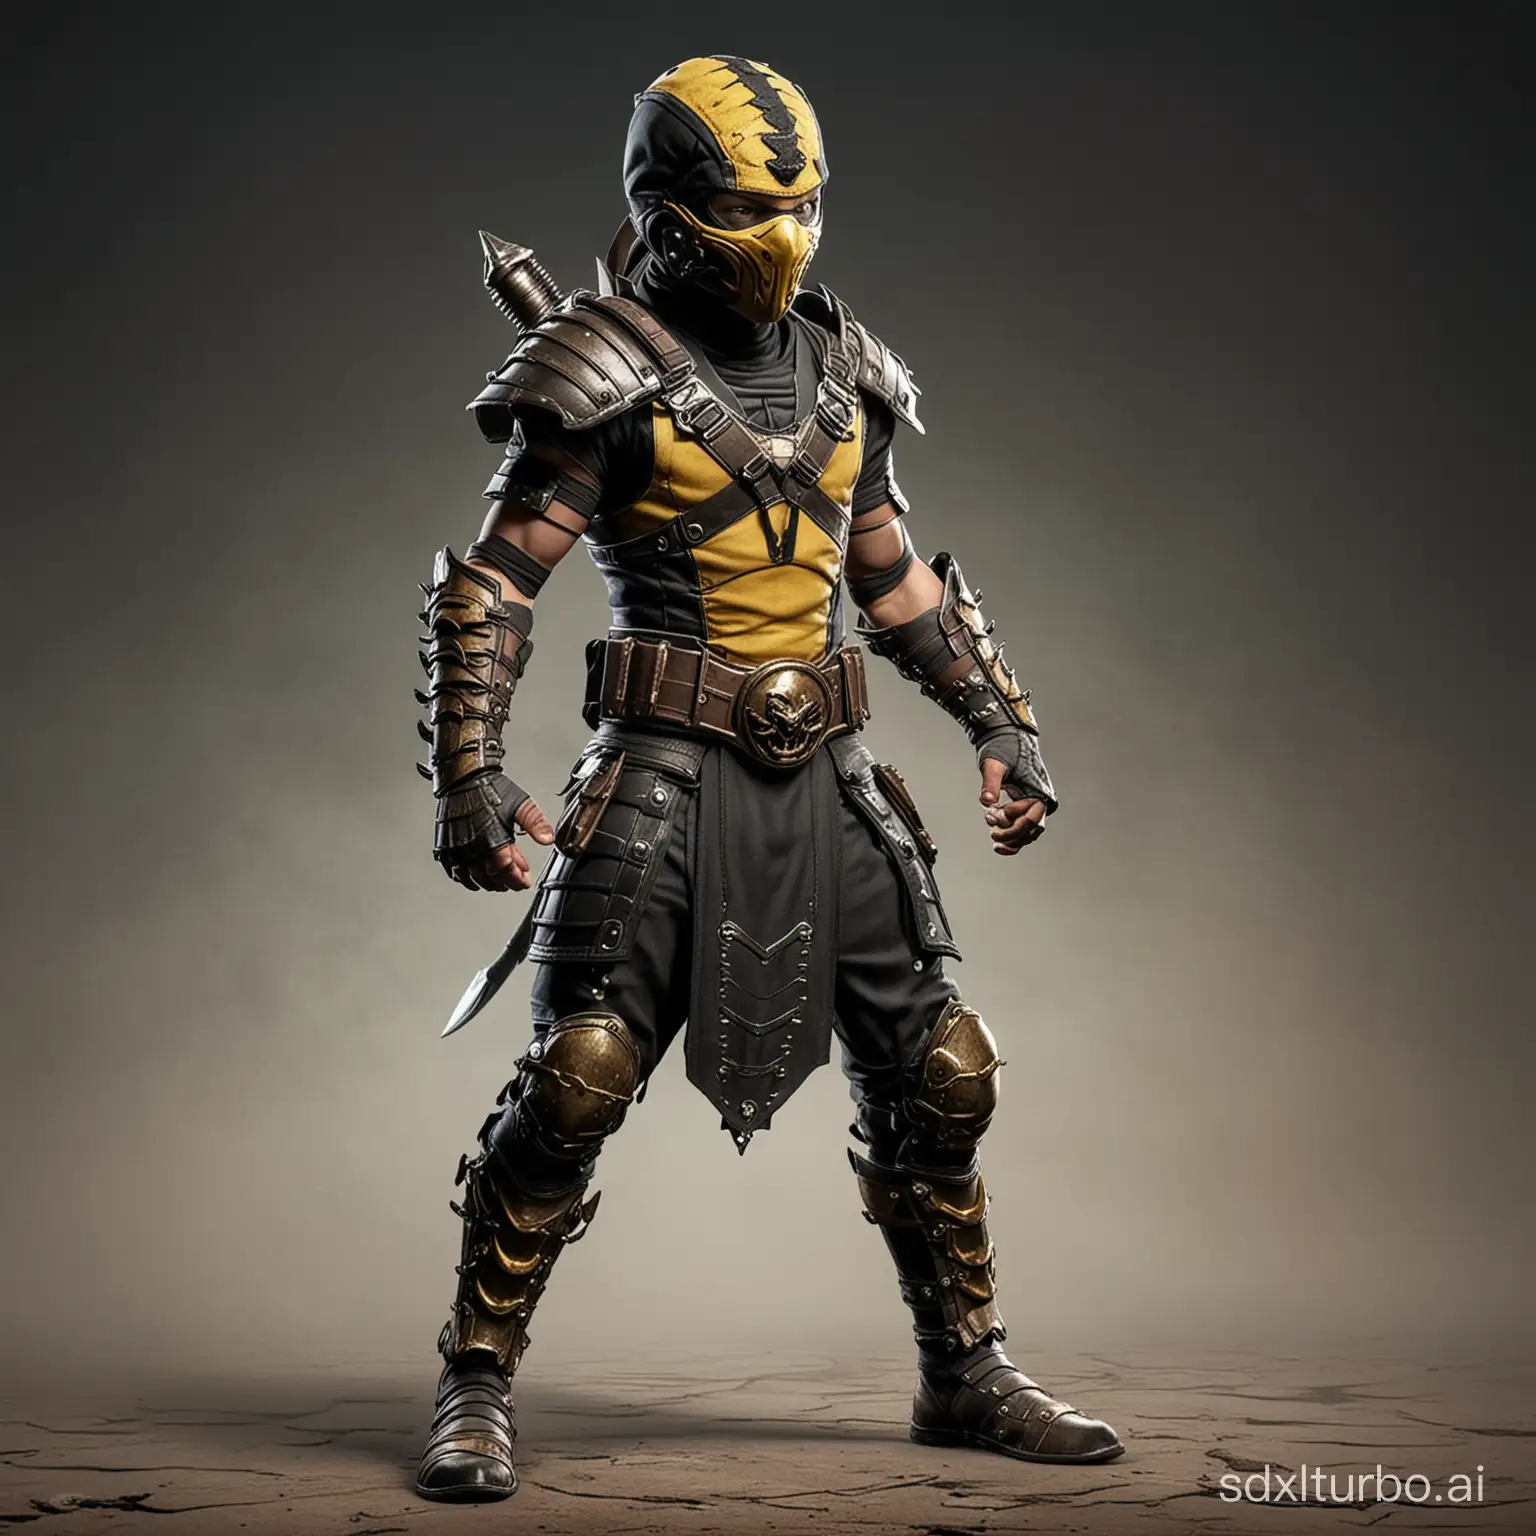 Young-Scorpion-Mortal-Kombat-Character-in-Full-Armor-with-Assault-Rifle